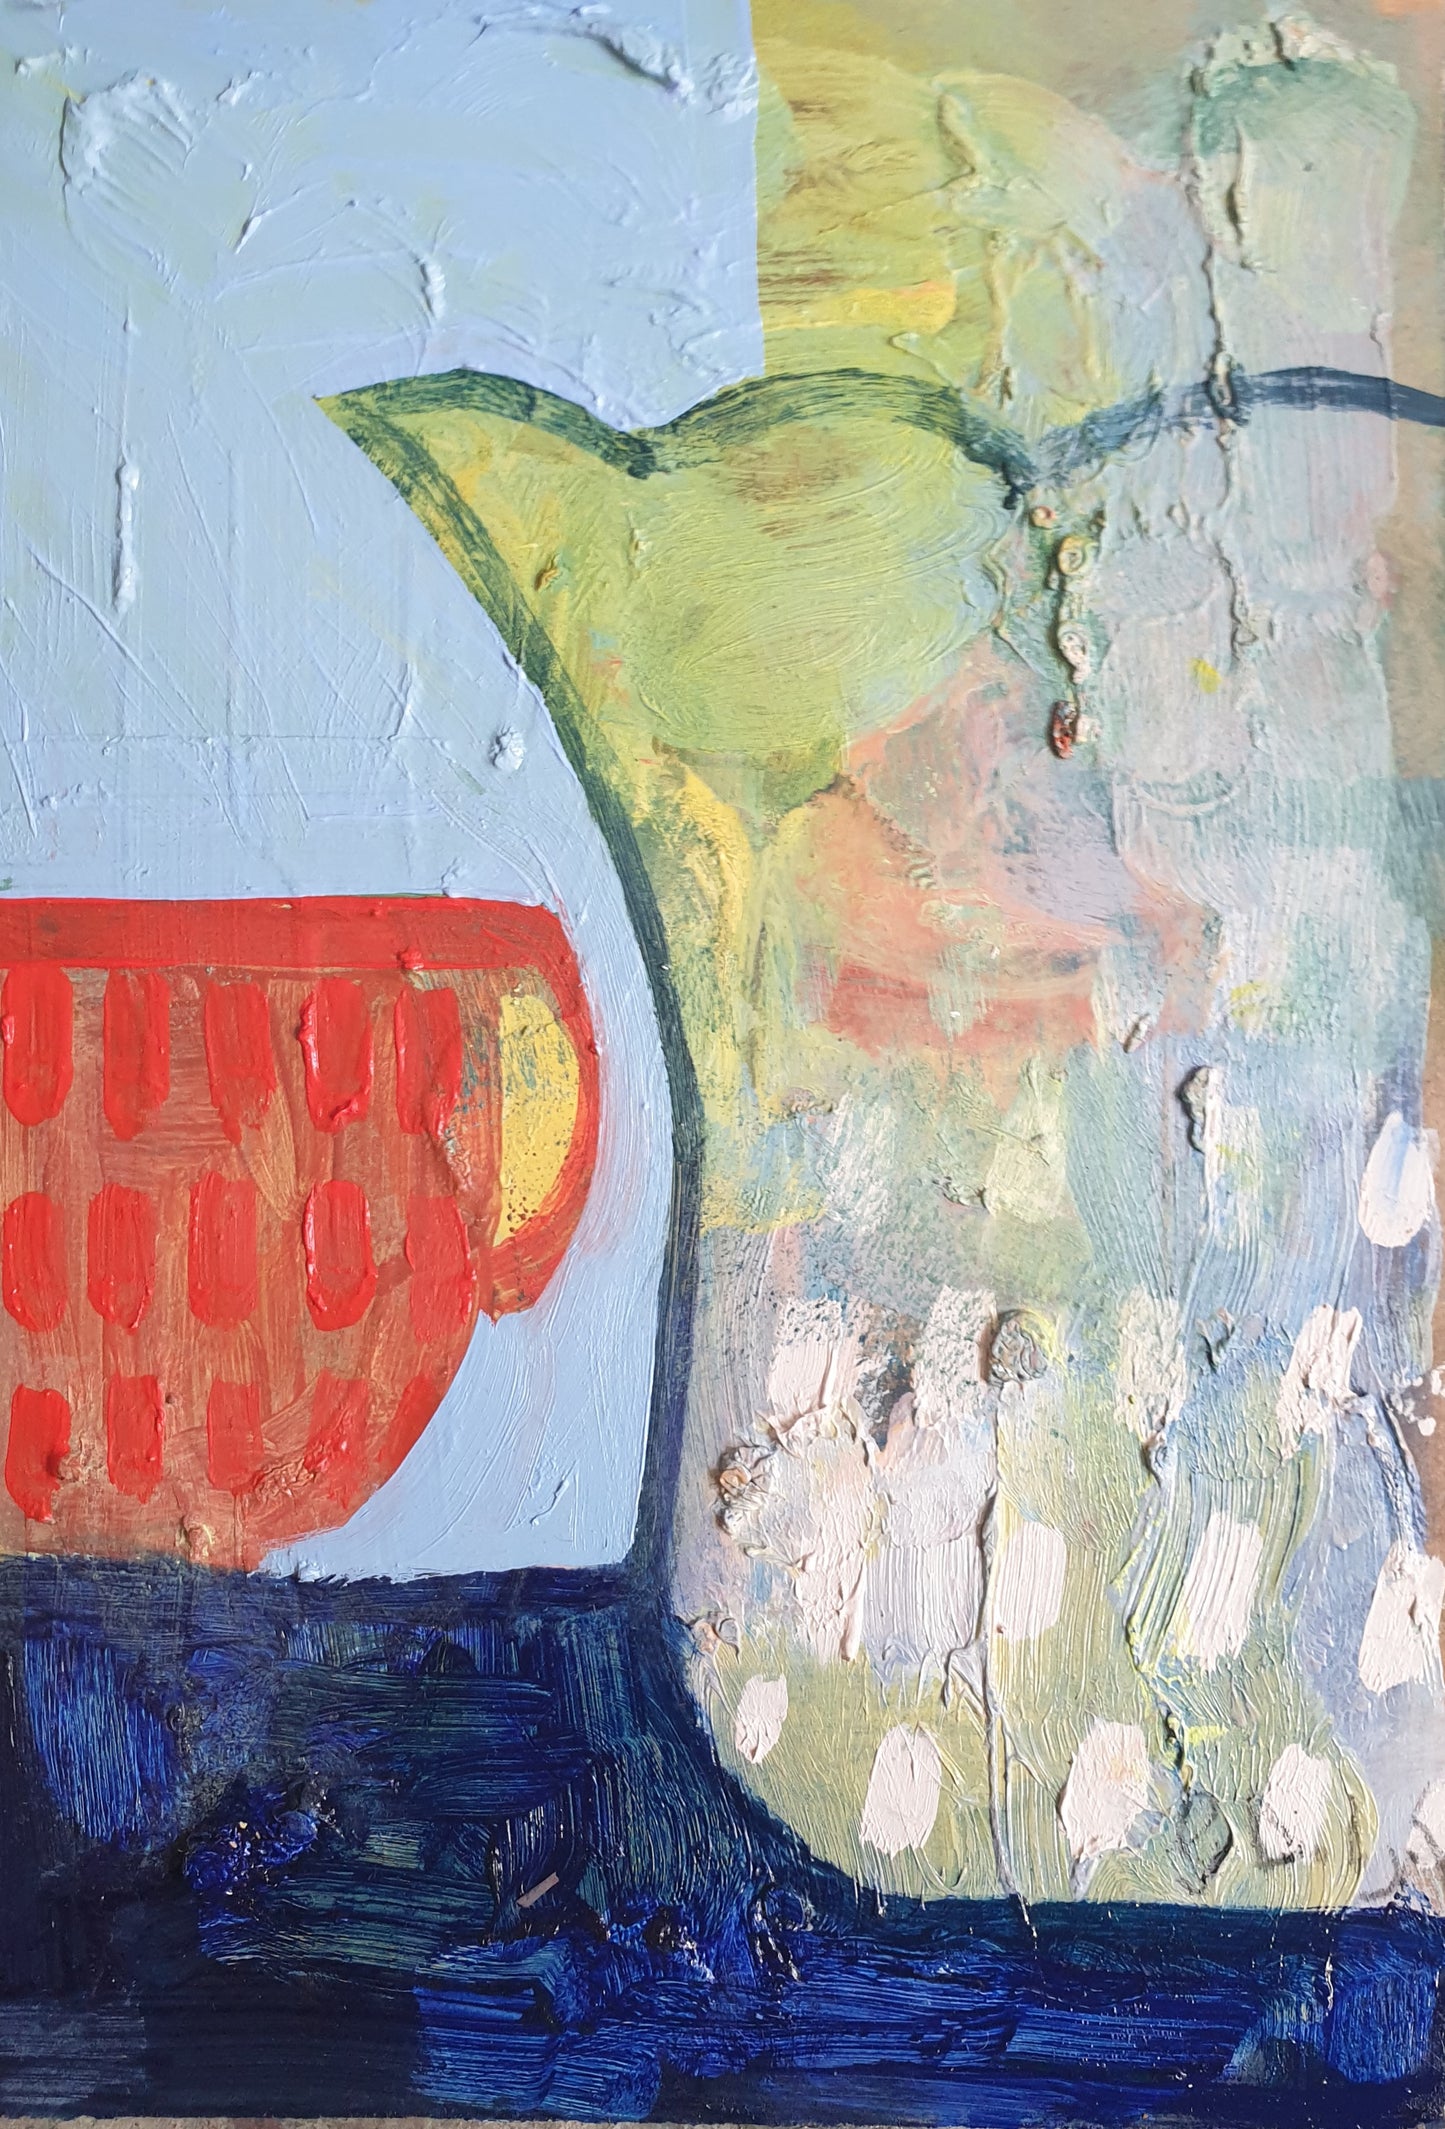 Red cup and glass vase